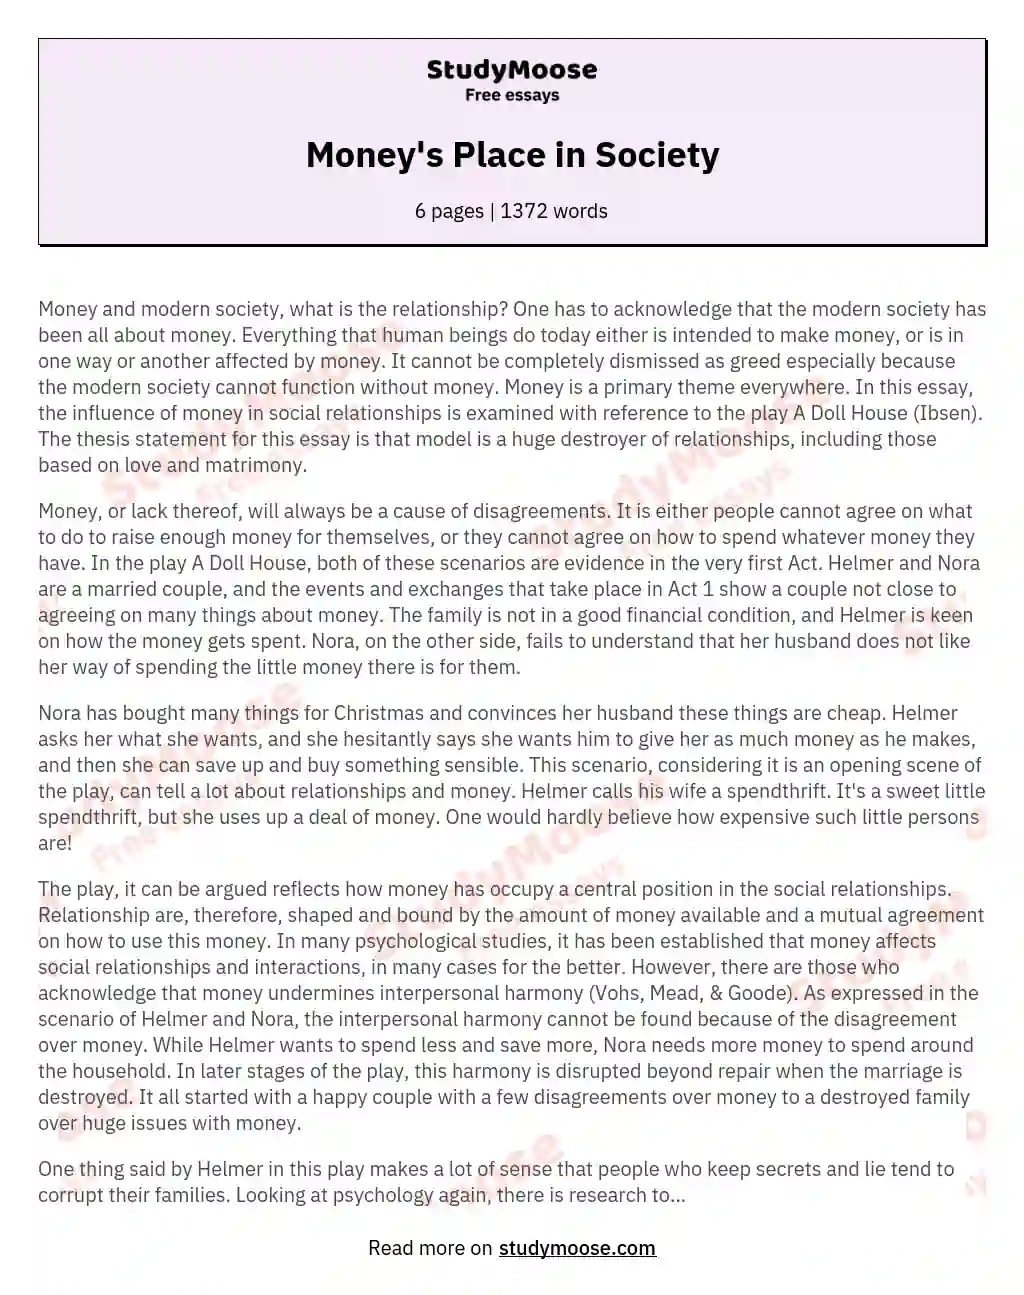 Money's Place in Society essay